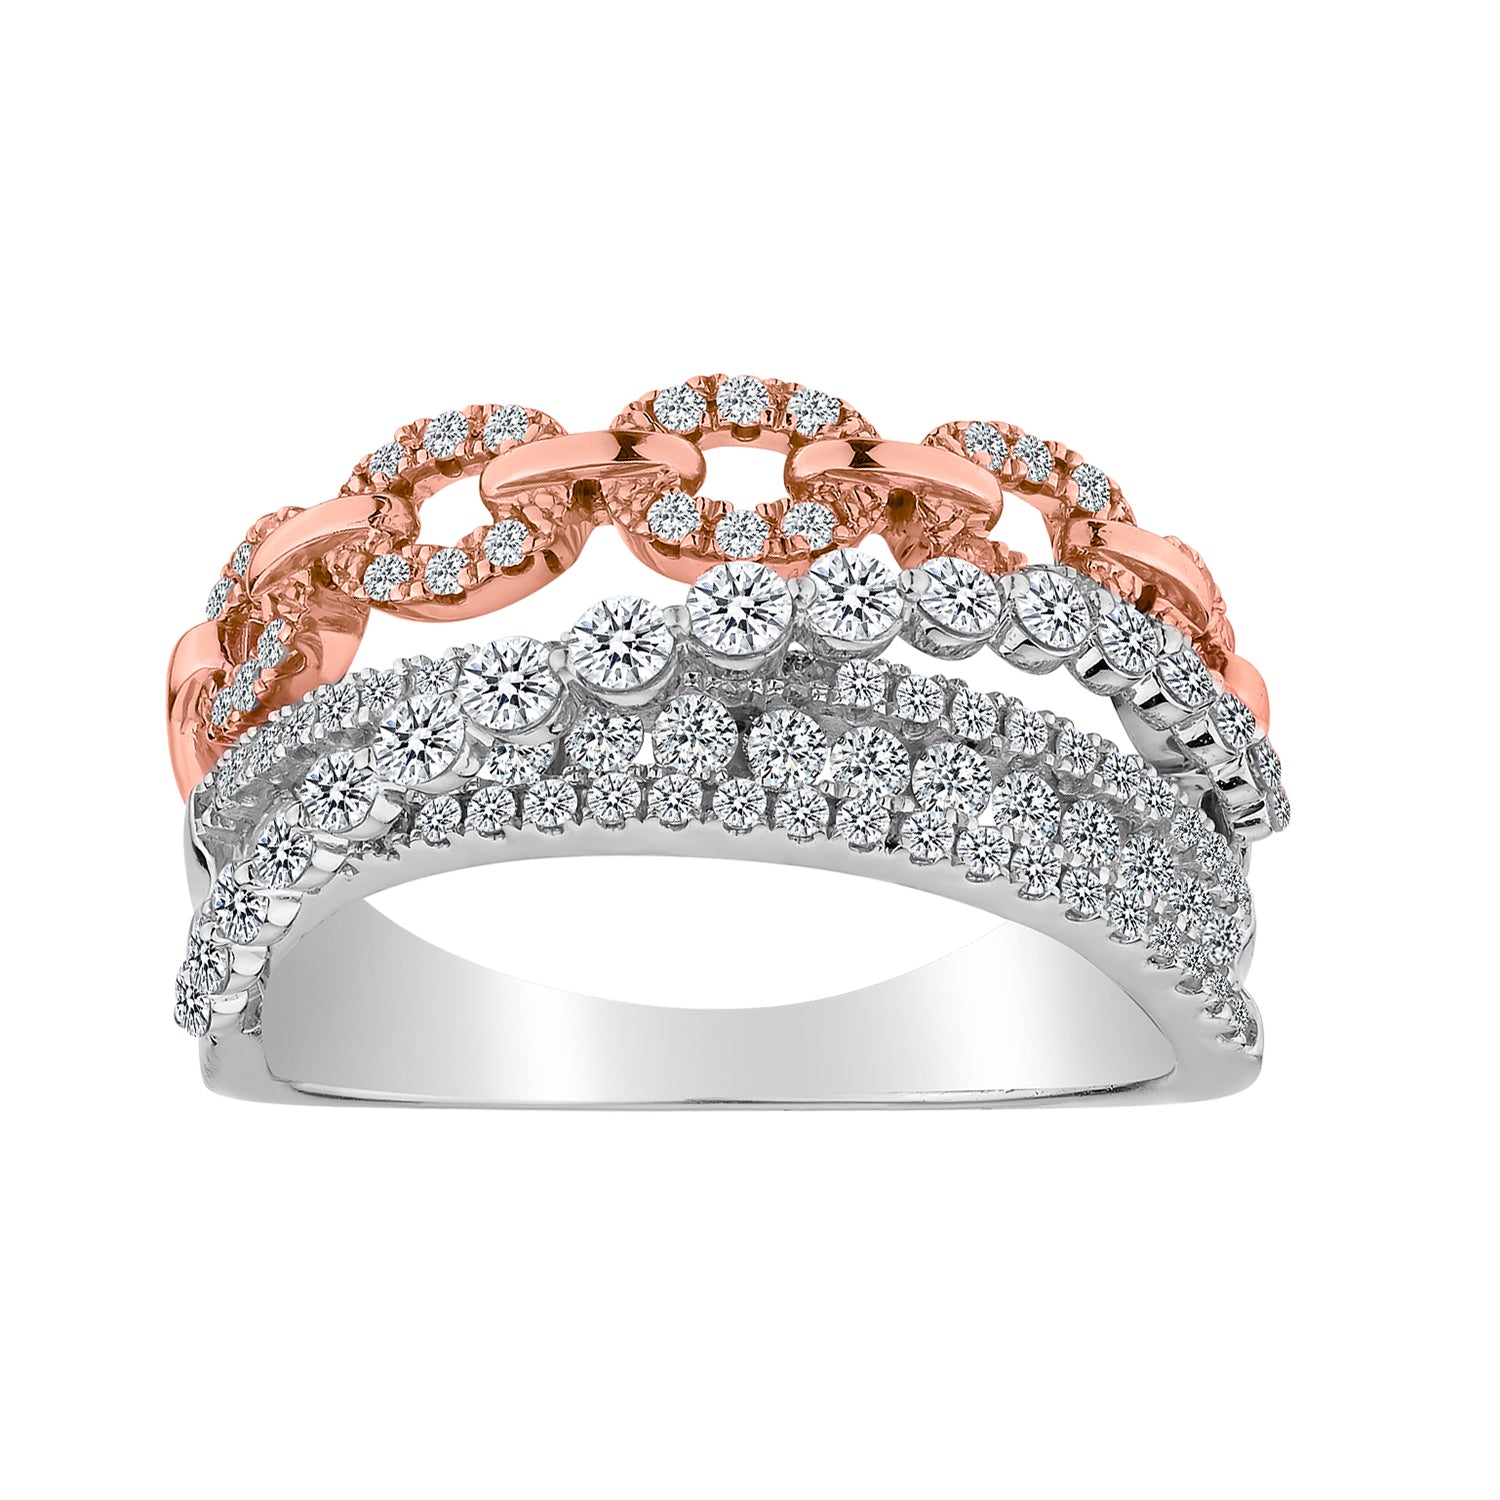 1.00 CARAT DIAMOND RING, 14kt WHITE AND ROSE GOLD (TWO TONE). Fashion Rings - Griffin Jewellery Designs